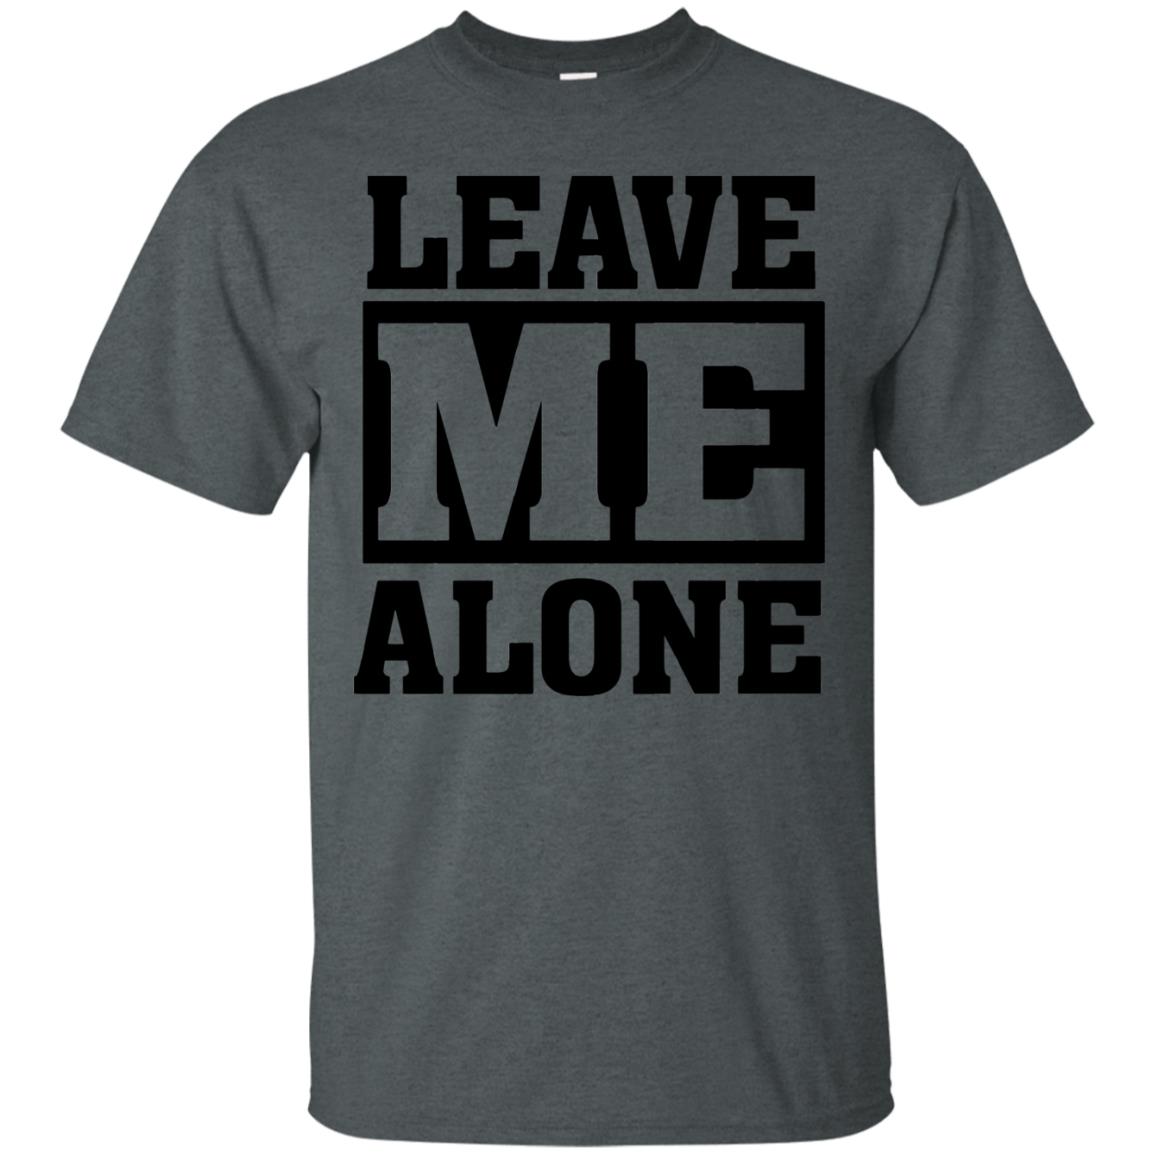 Leave Me Alone Shirts - 10% Off - FavorMerch